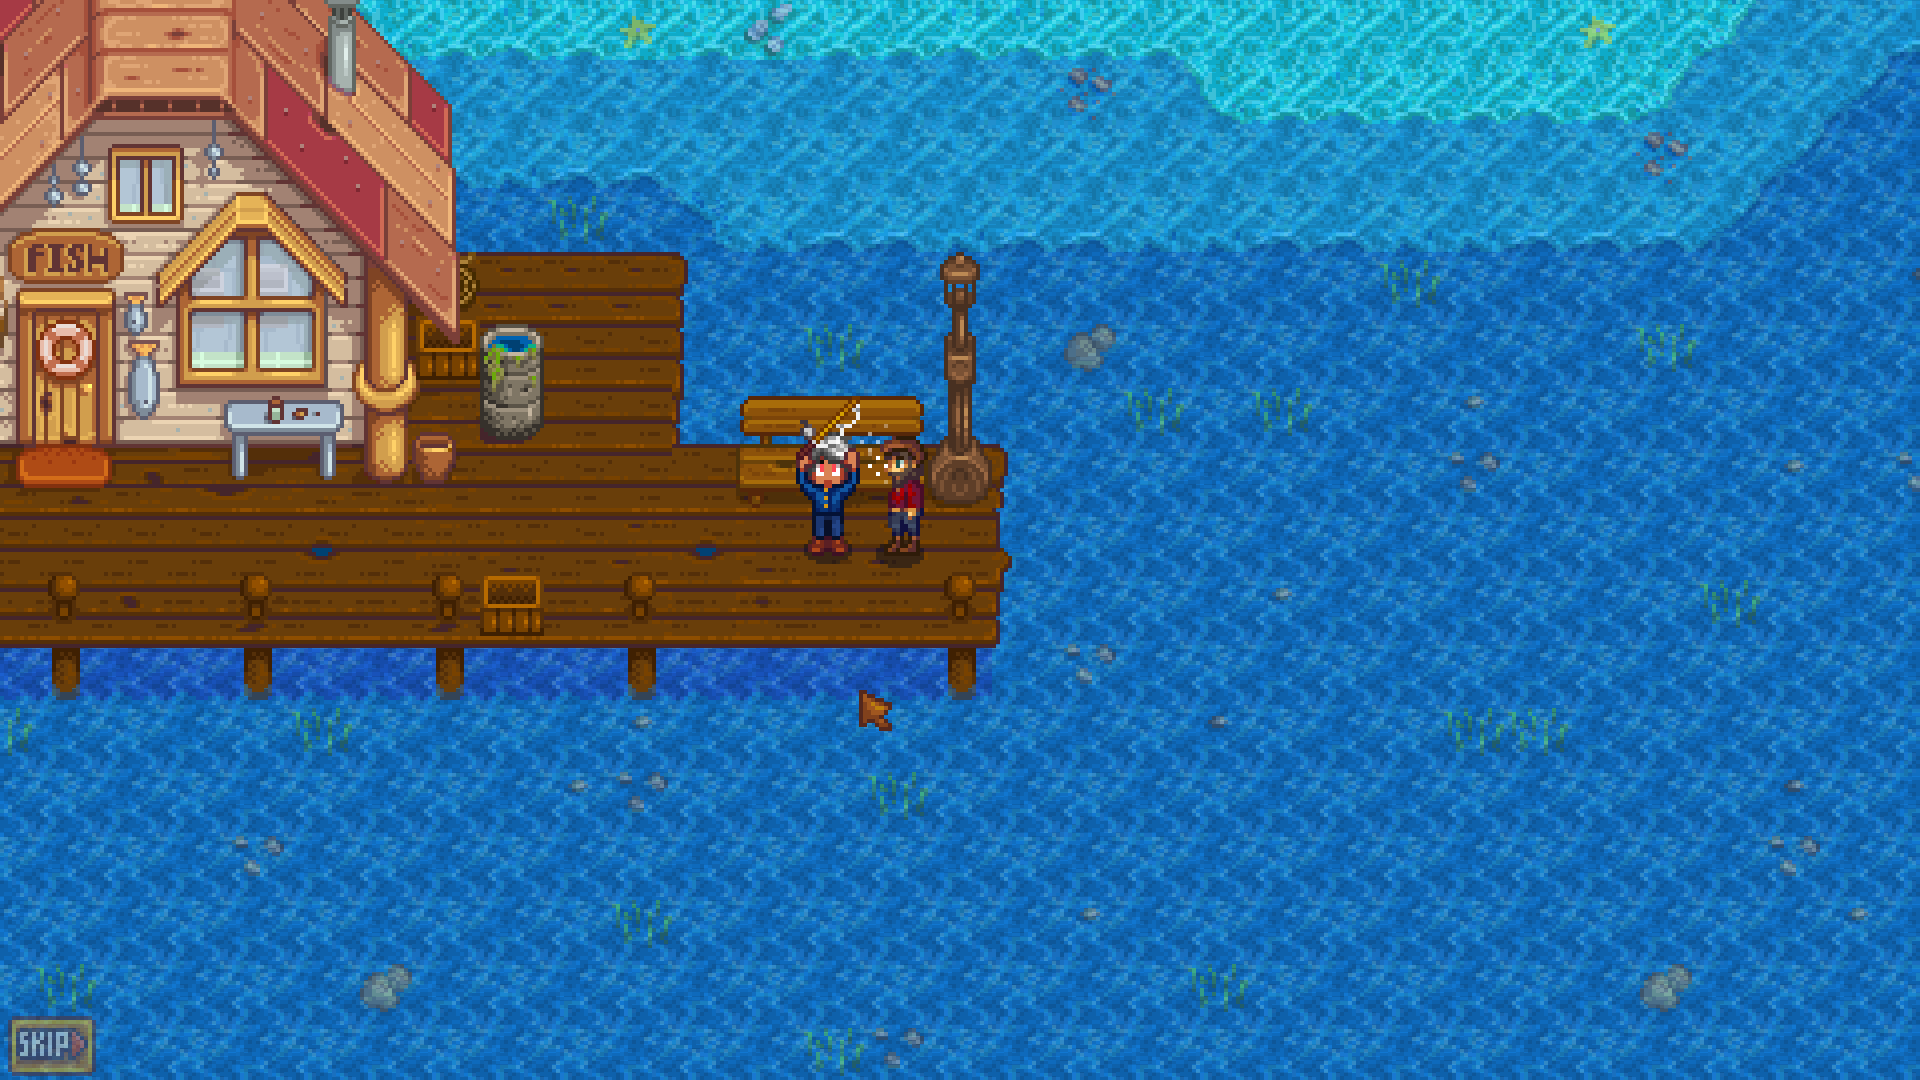 willy giving the player a fishing rod